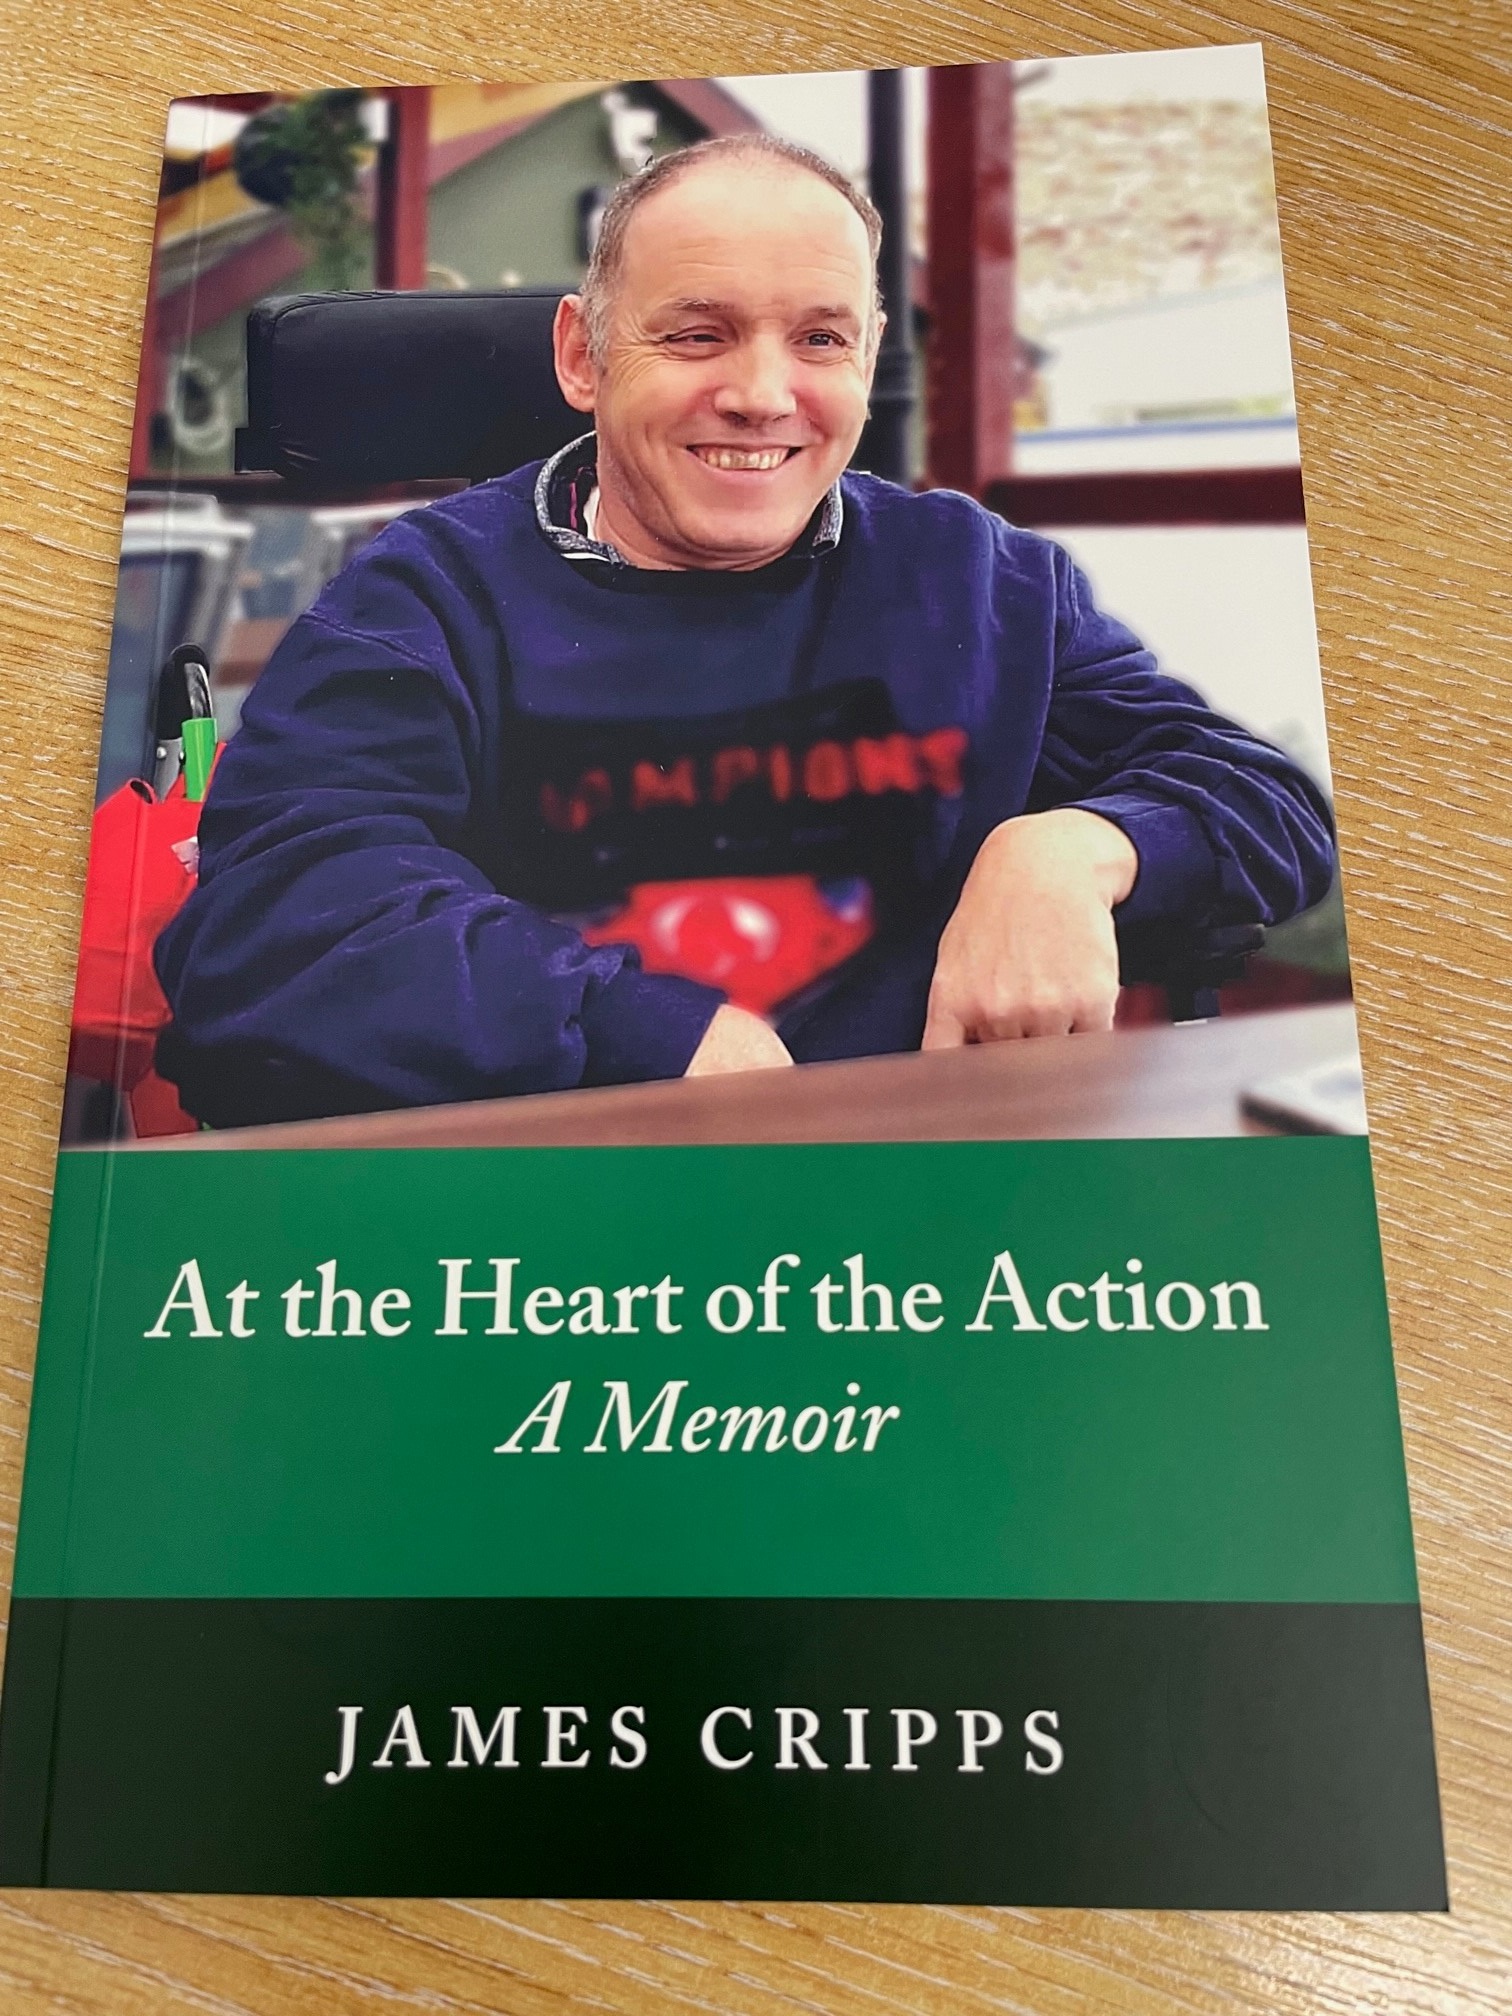 Front cover of book featuring photo of James Cripps and book title 'At the Heart of the Action: A Memoir'